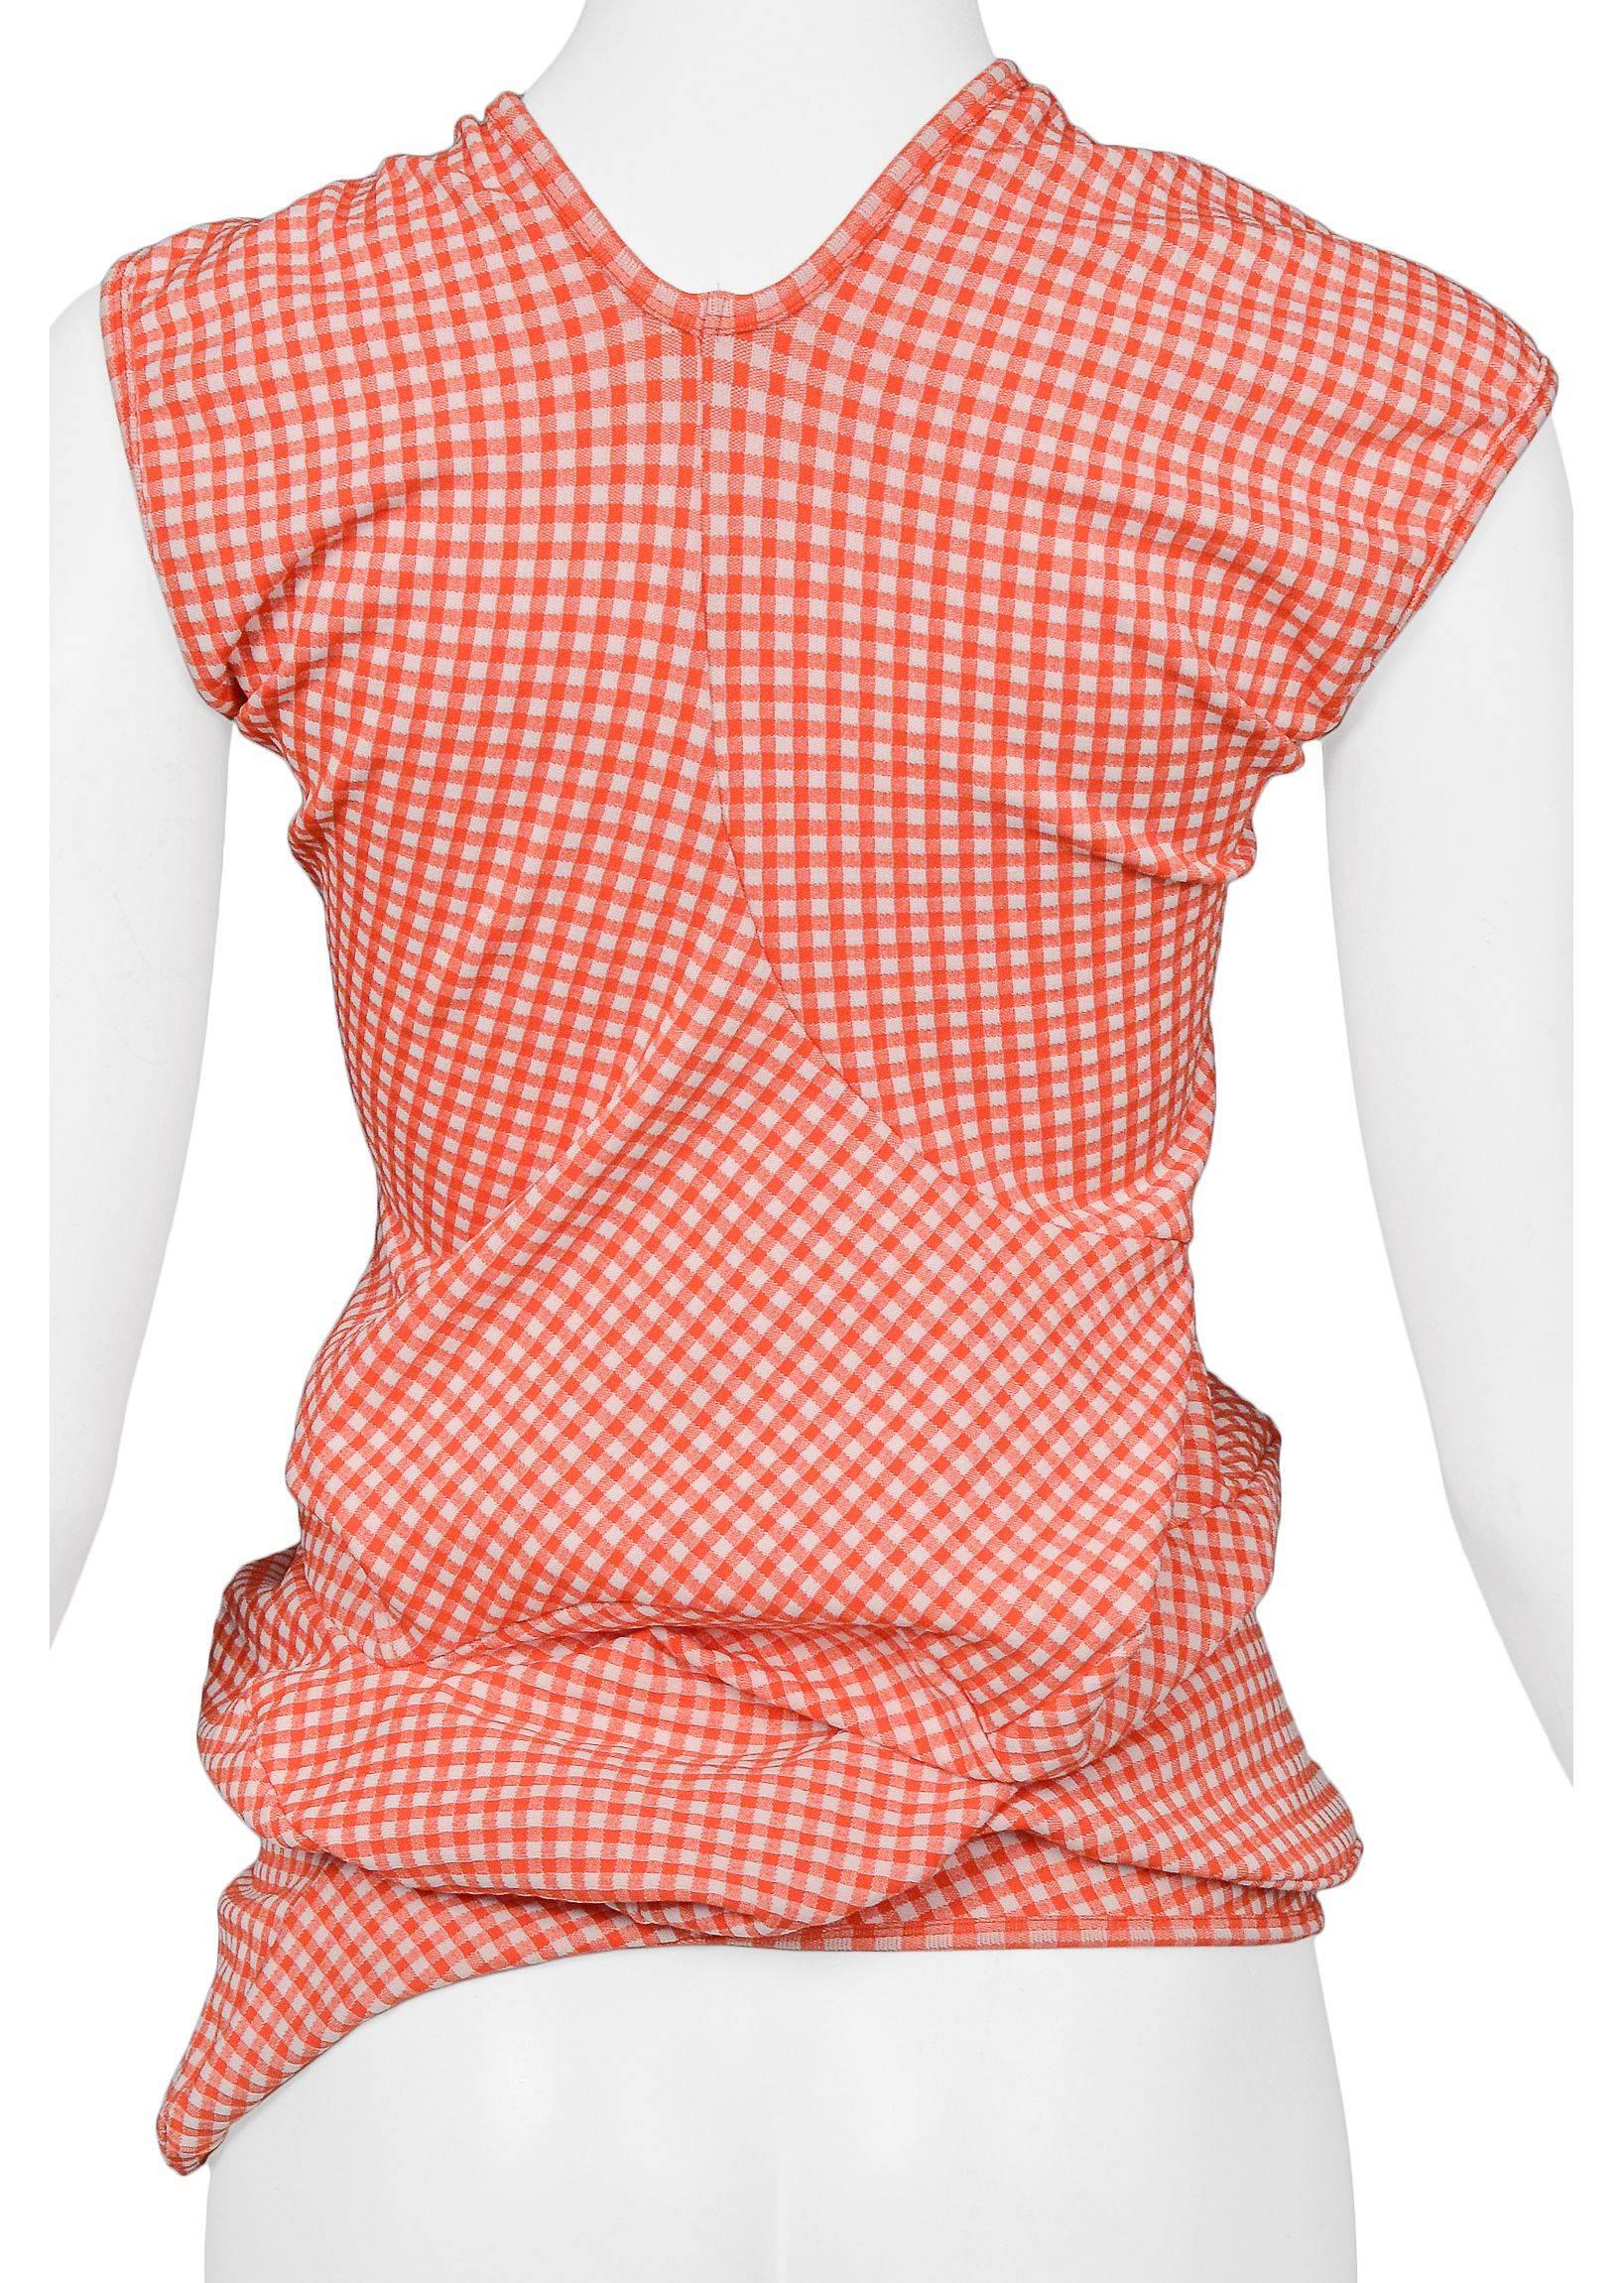 Museum Quality Comme des Garcons Lumps & Bumps SS 1997 Red Gingham Top For Sale 3